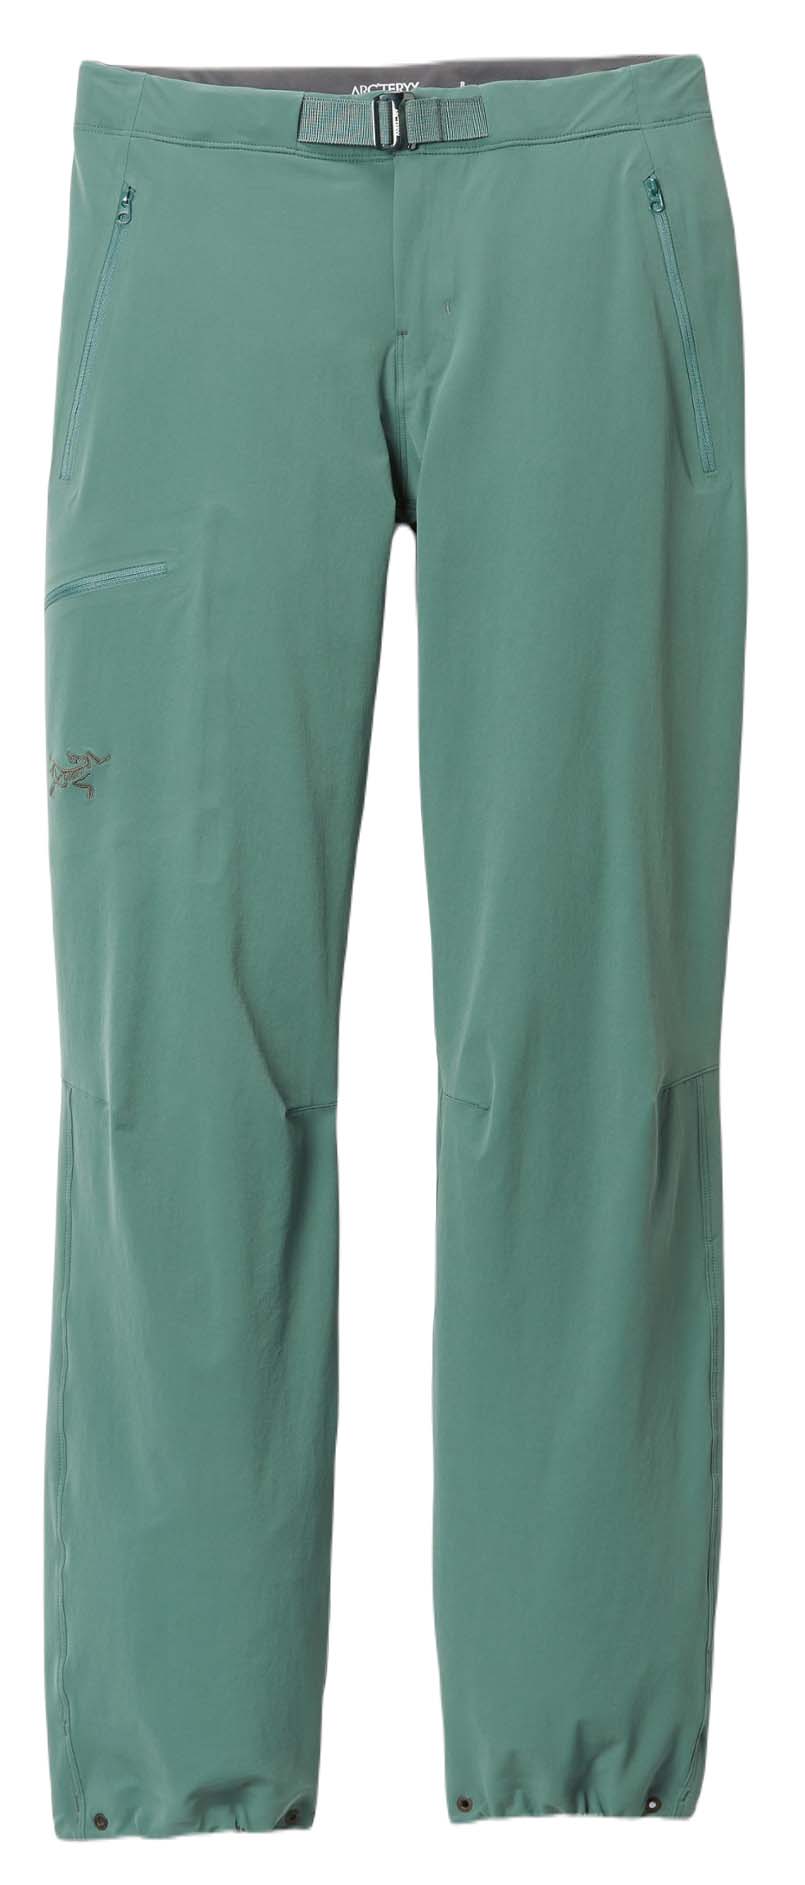 Eddie Bauer Utility Capri SIZE 12 Green - $40 New With Tags - From My